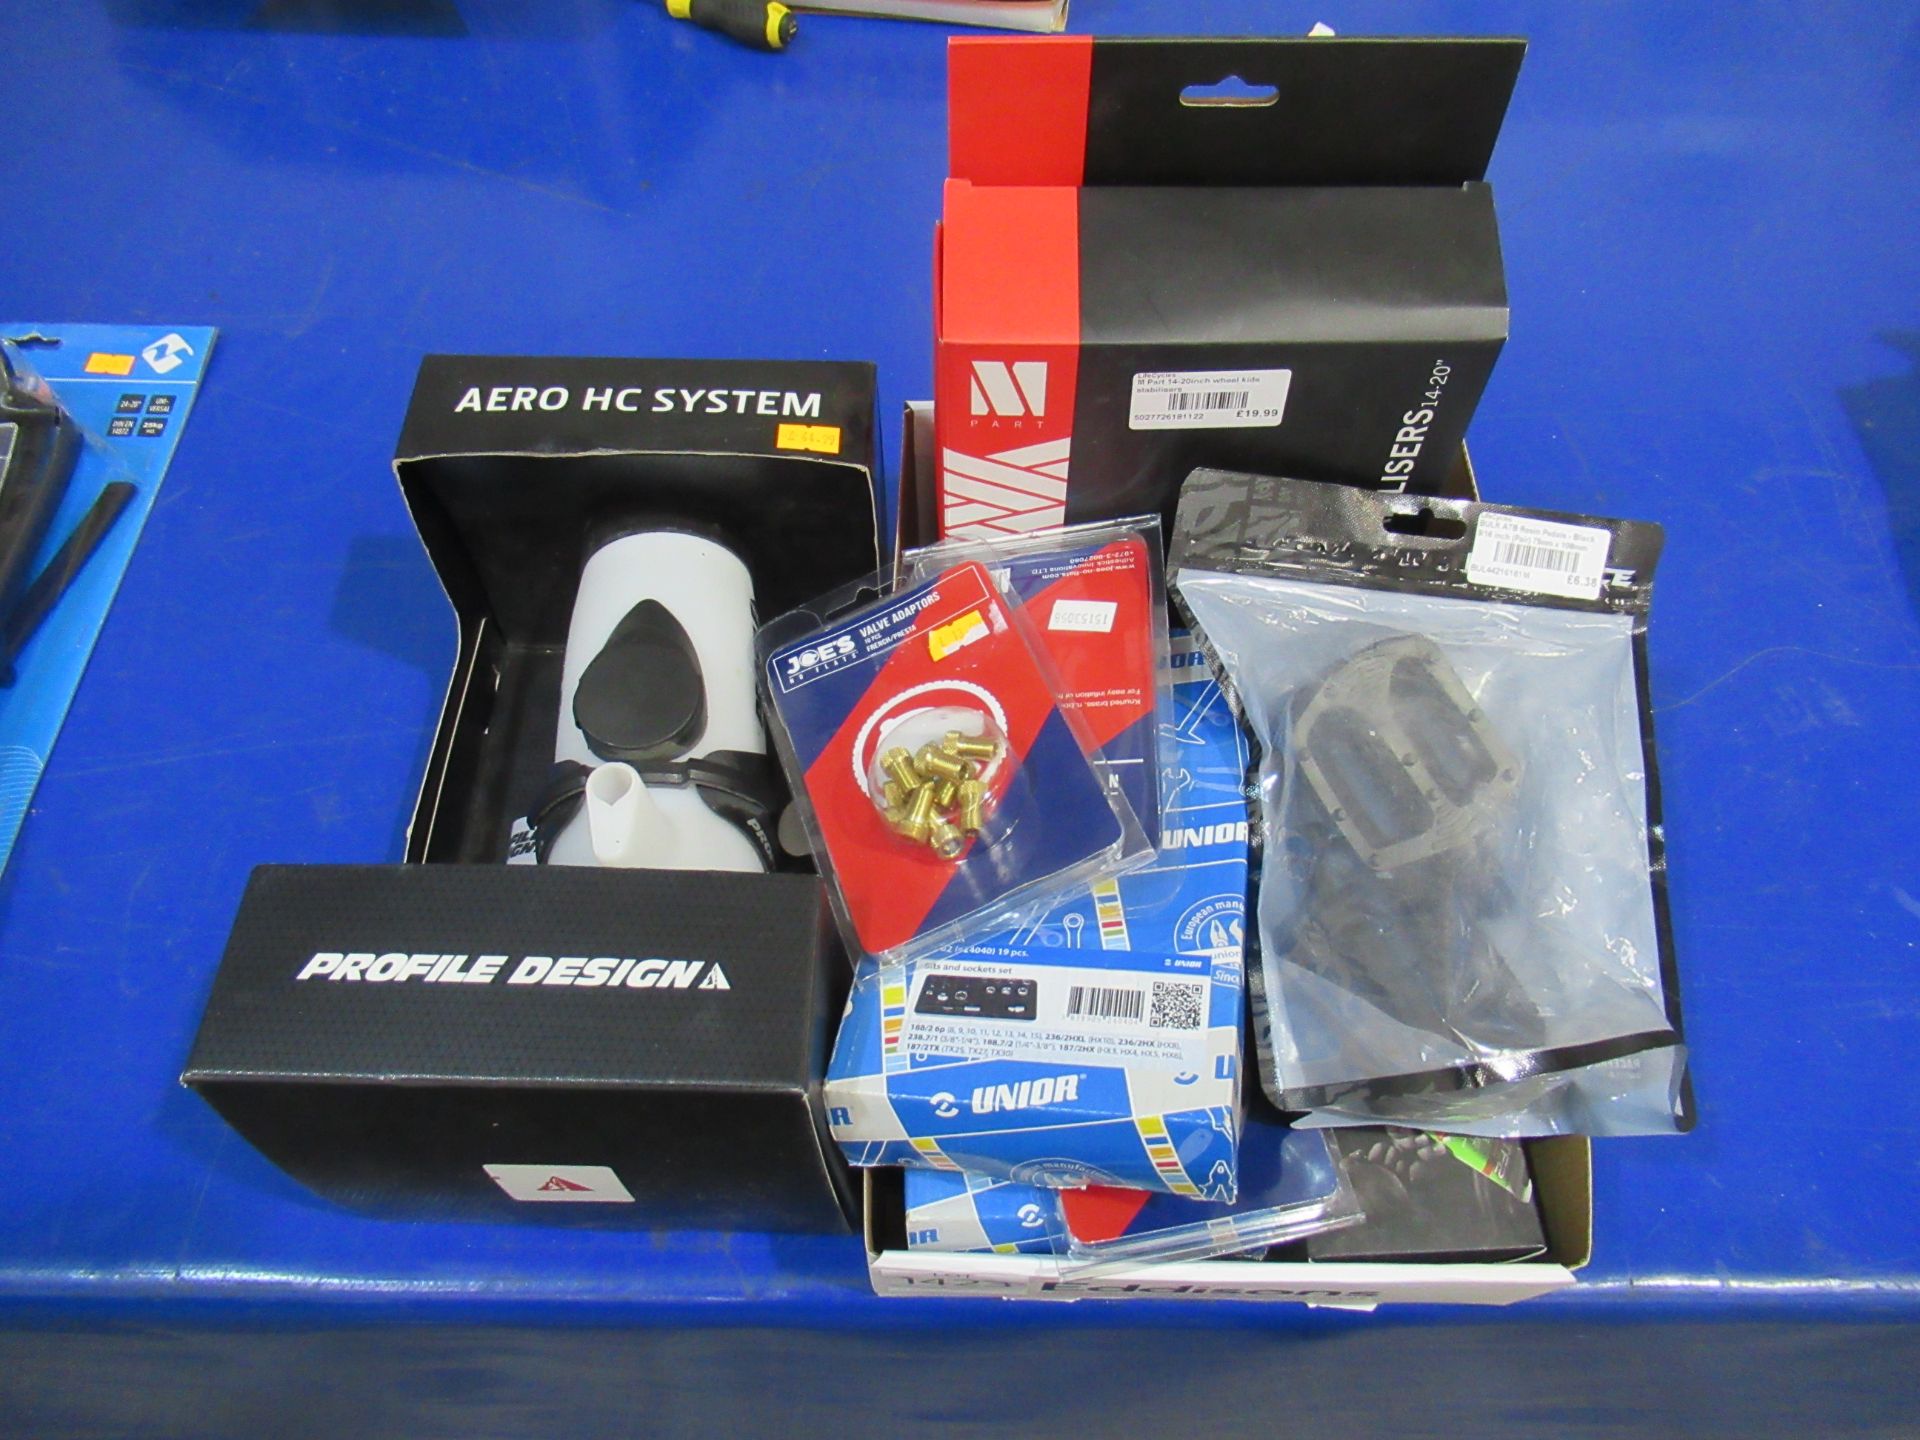 Assorted cycling items including Aero HC system, Union socket sets, Weldite grease gun etc.